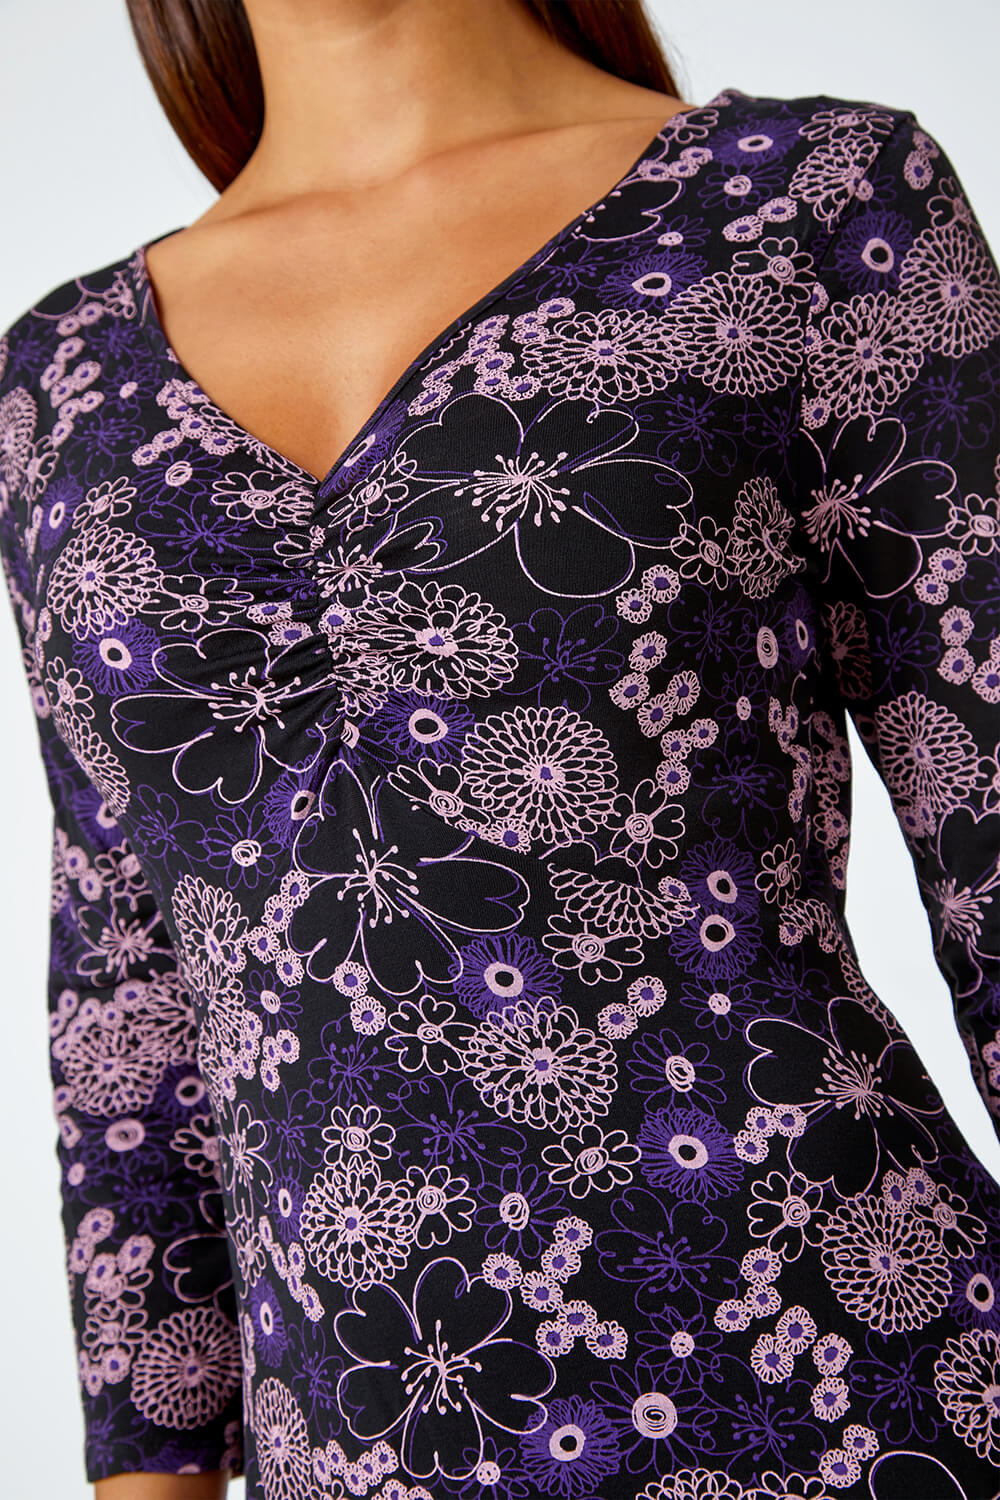 Purple Floral Print Ruched Midi Stretch Dress, Image 5 of 5